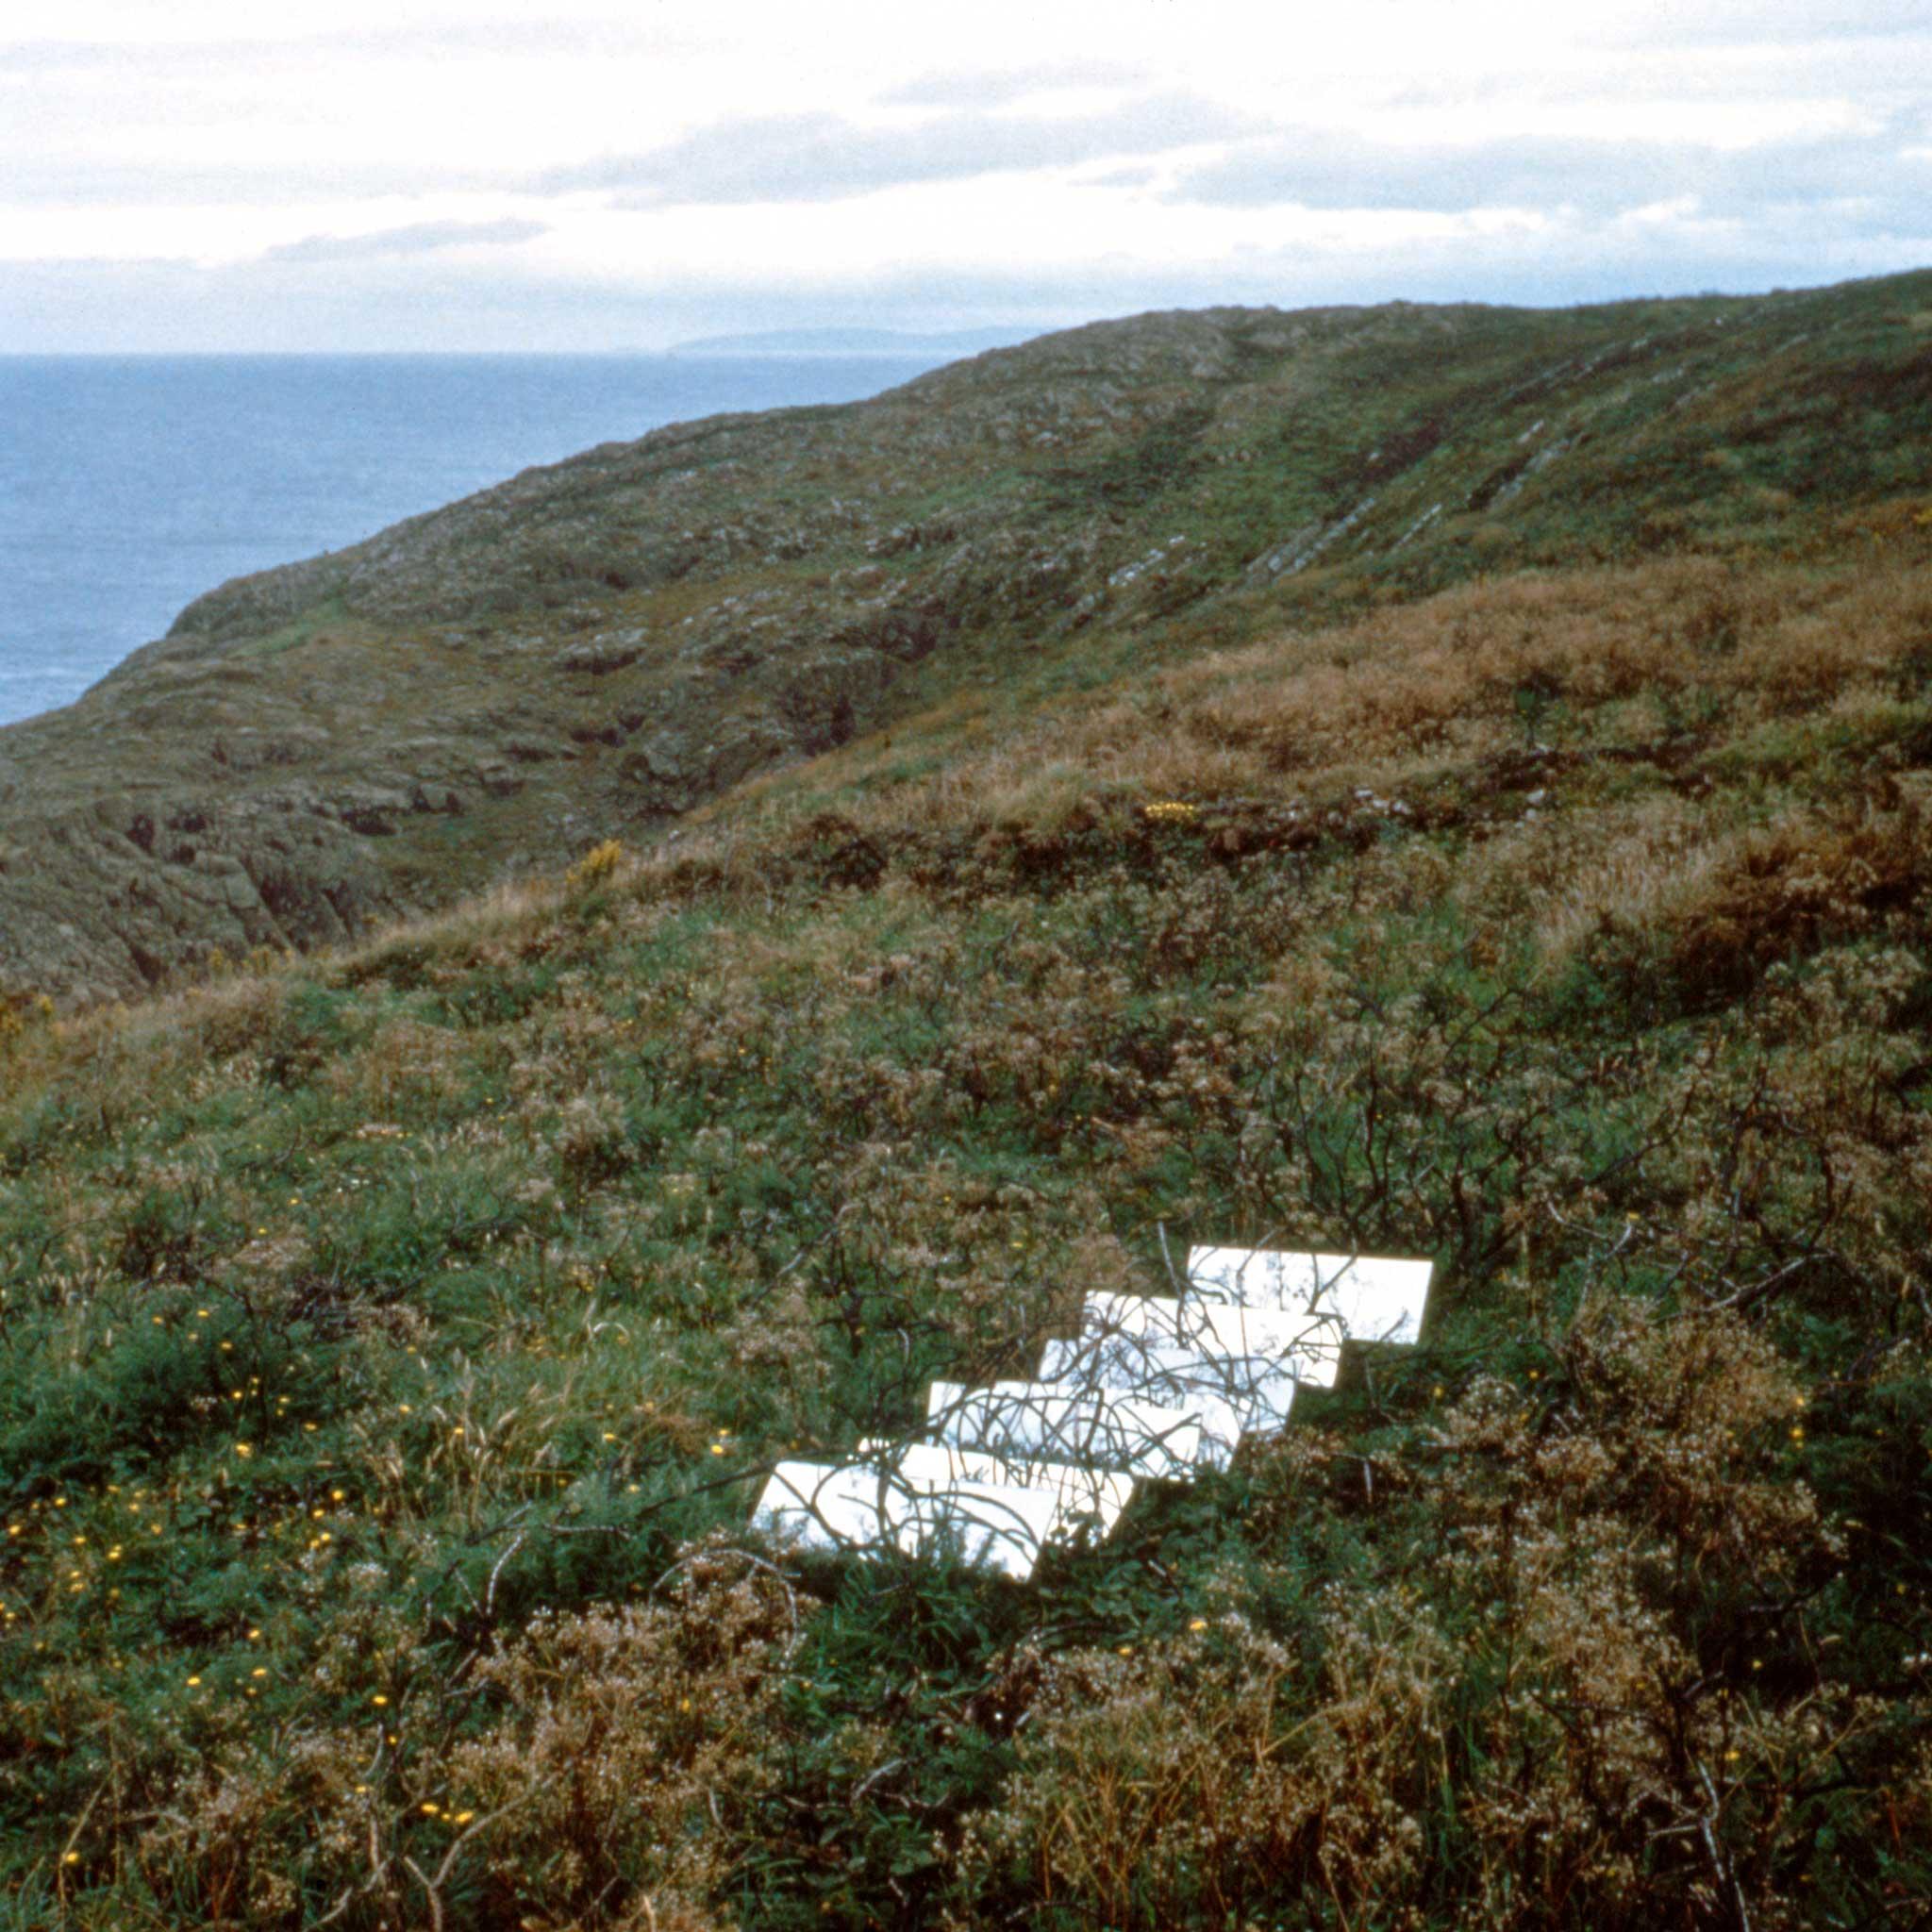 grassy hilly landscape with ocean in background with seven mirrors placed on the ground.